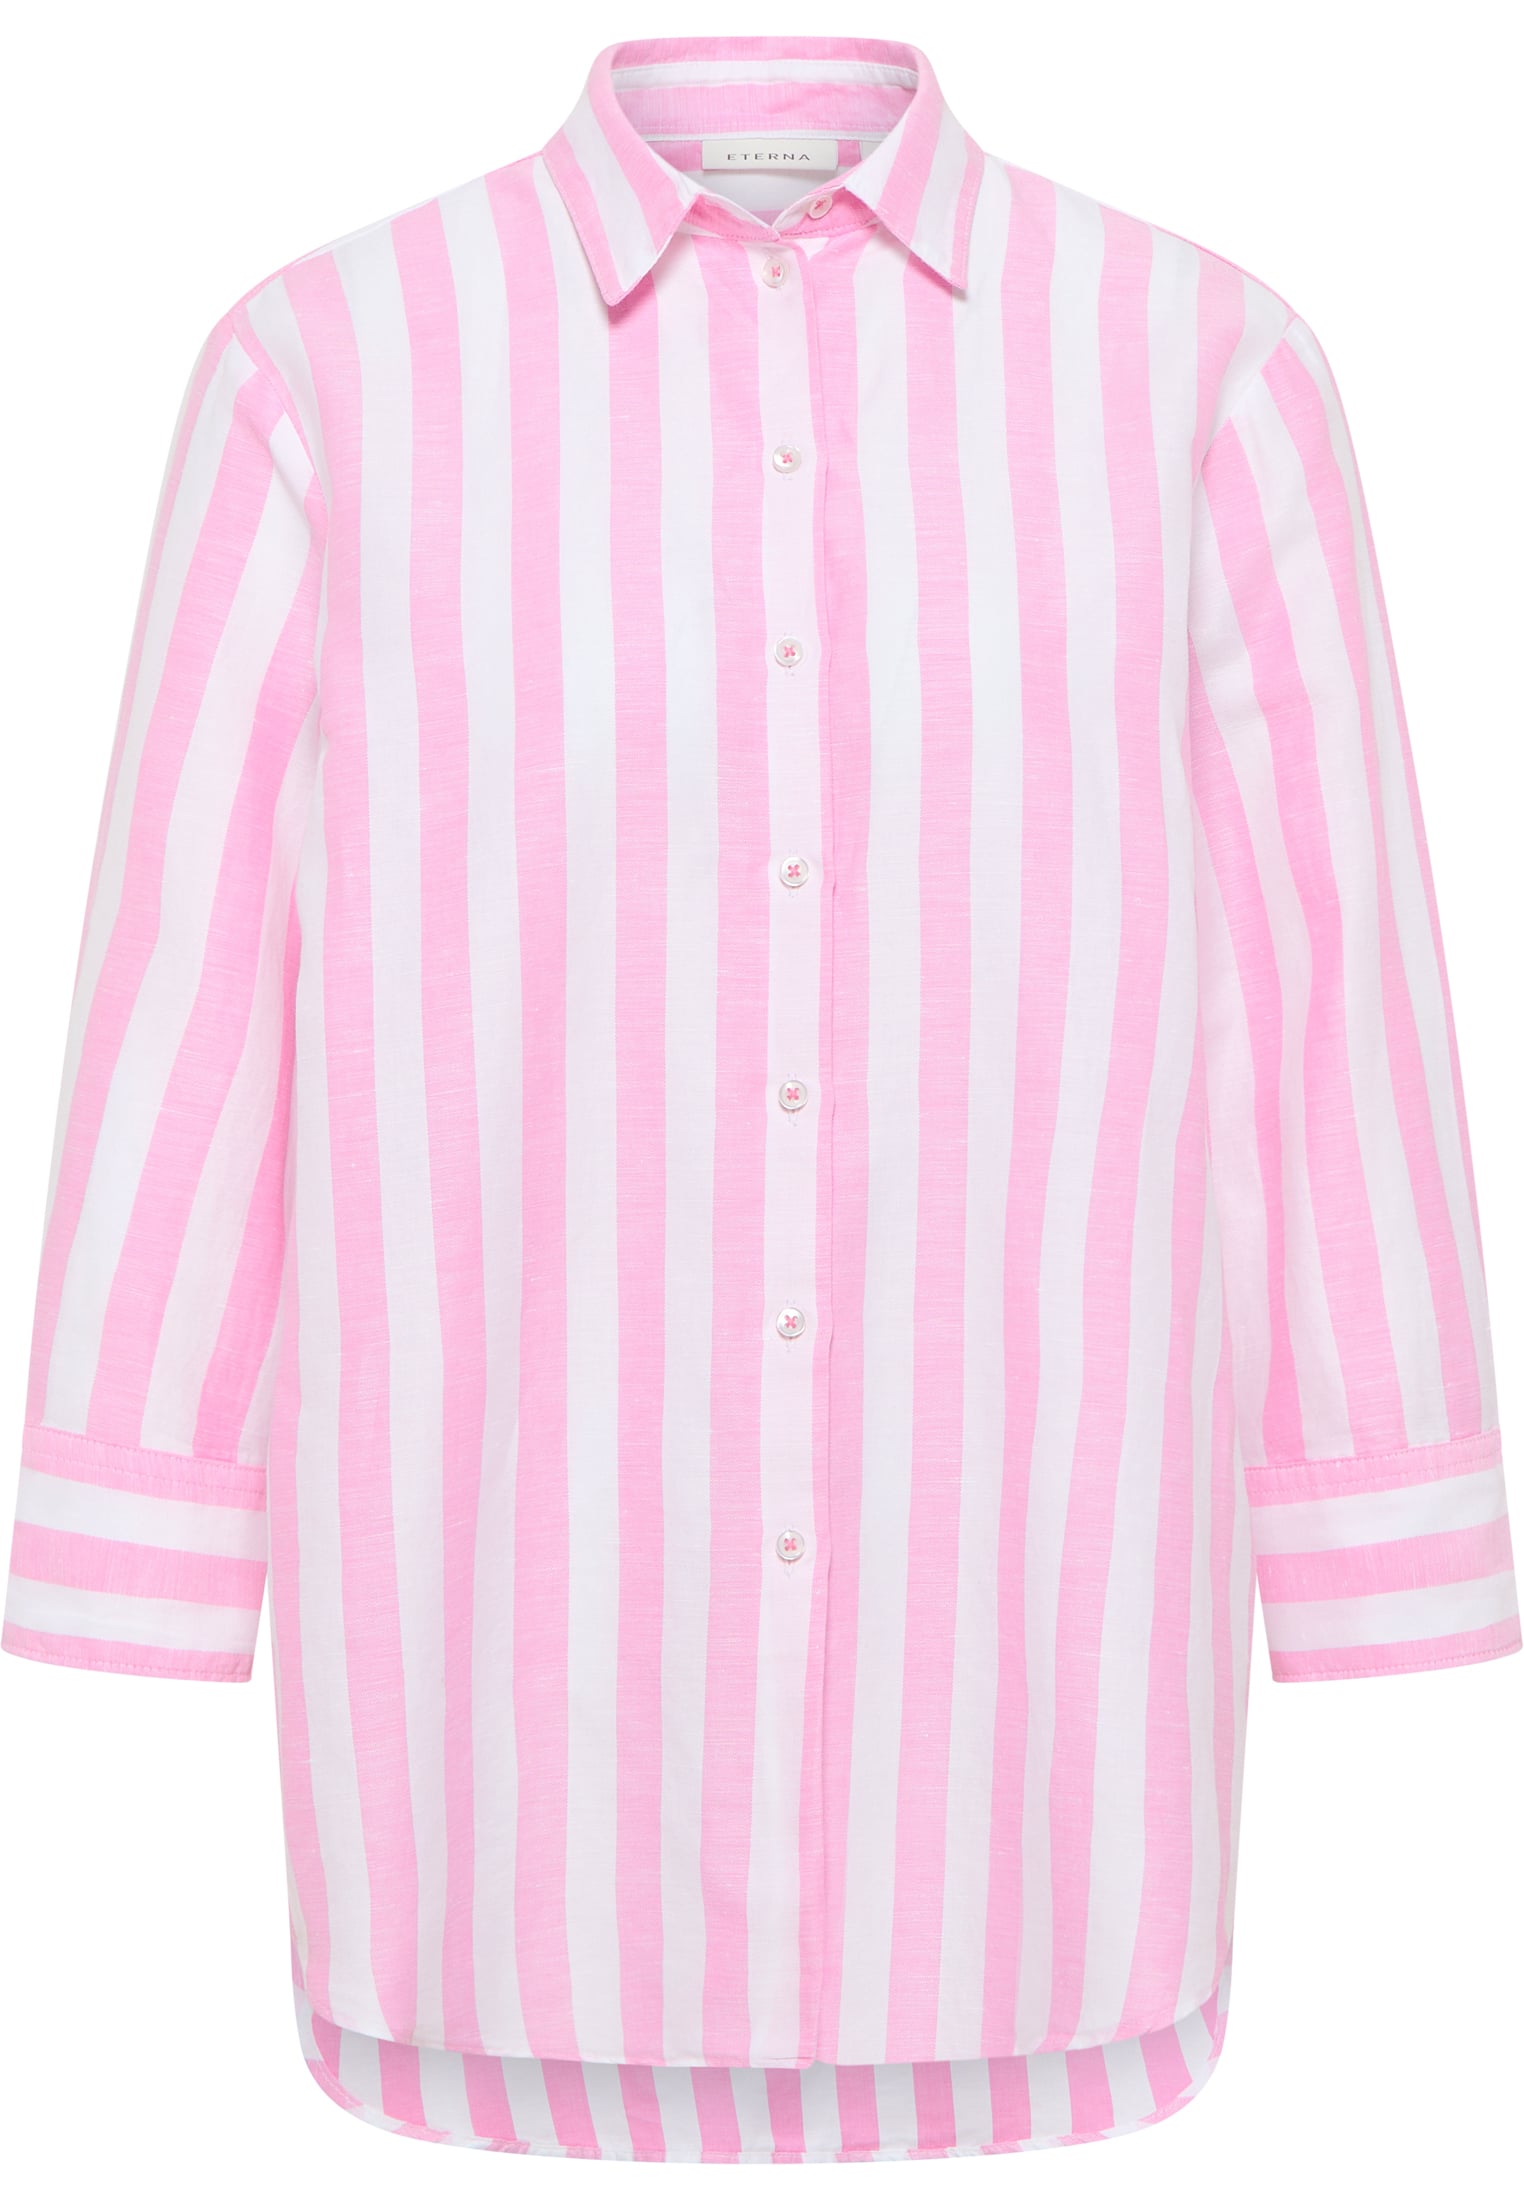 in rose 3/4 | shirt-blouse 36 | | striped | 2BL03967-15-11-36-3/4 rose sleeves